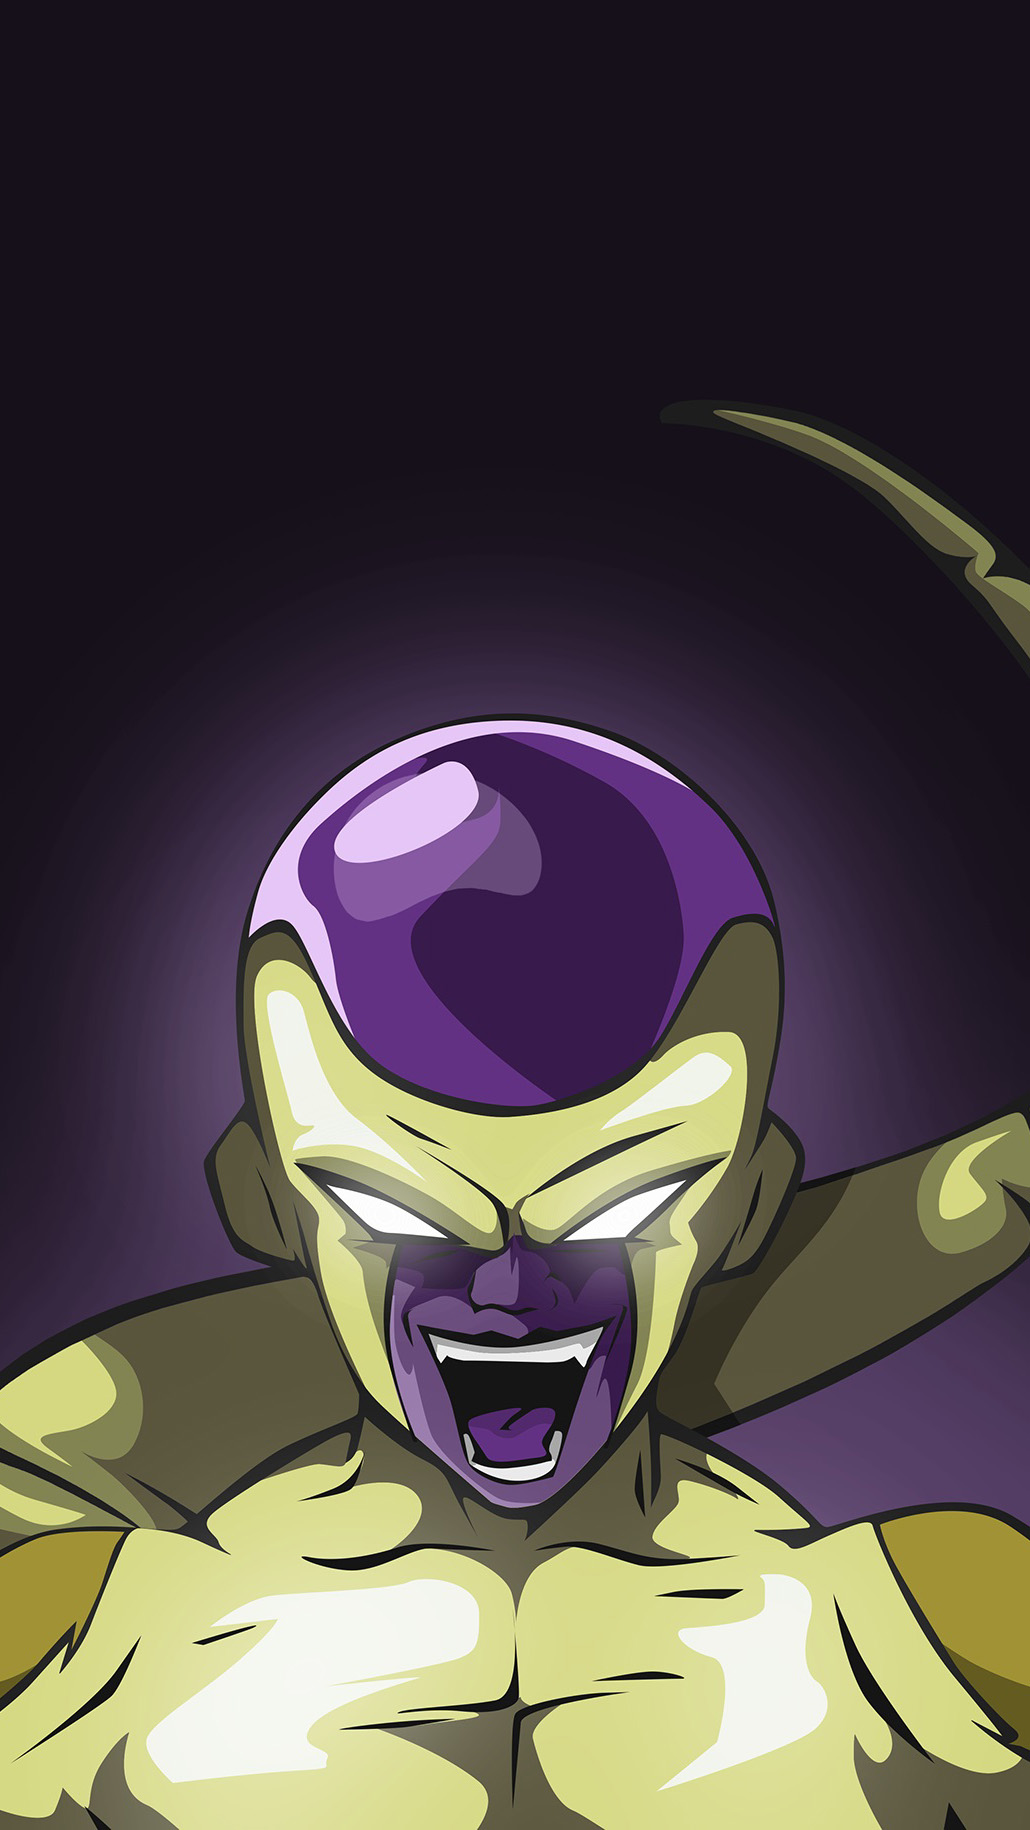 Discover 60+ frieza wallpaper - in.cdgdbentre